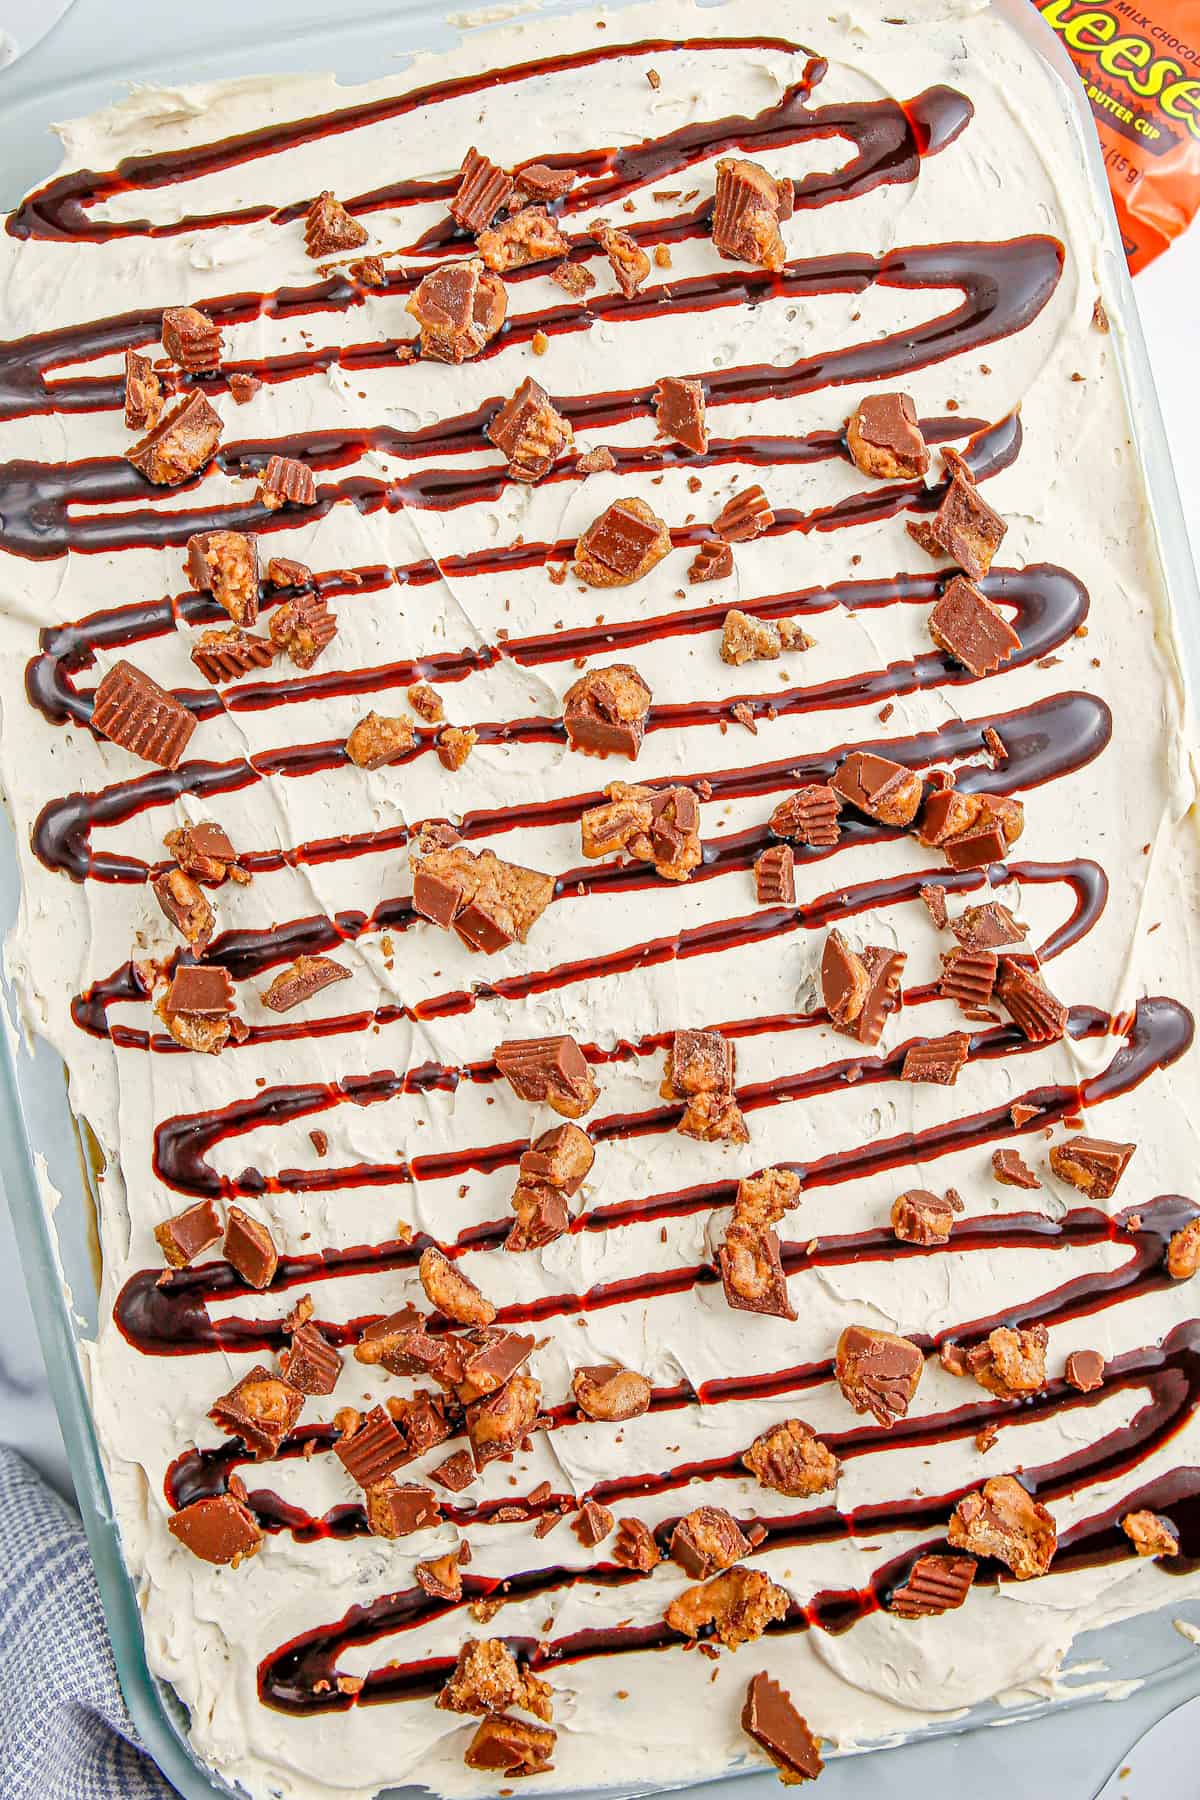 Overhead photo of finished Reese's Ice Cream Sandwich Cake topped with chopped Reese's and chocolate syrup.